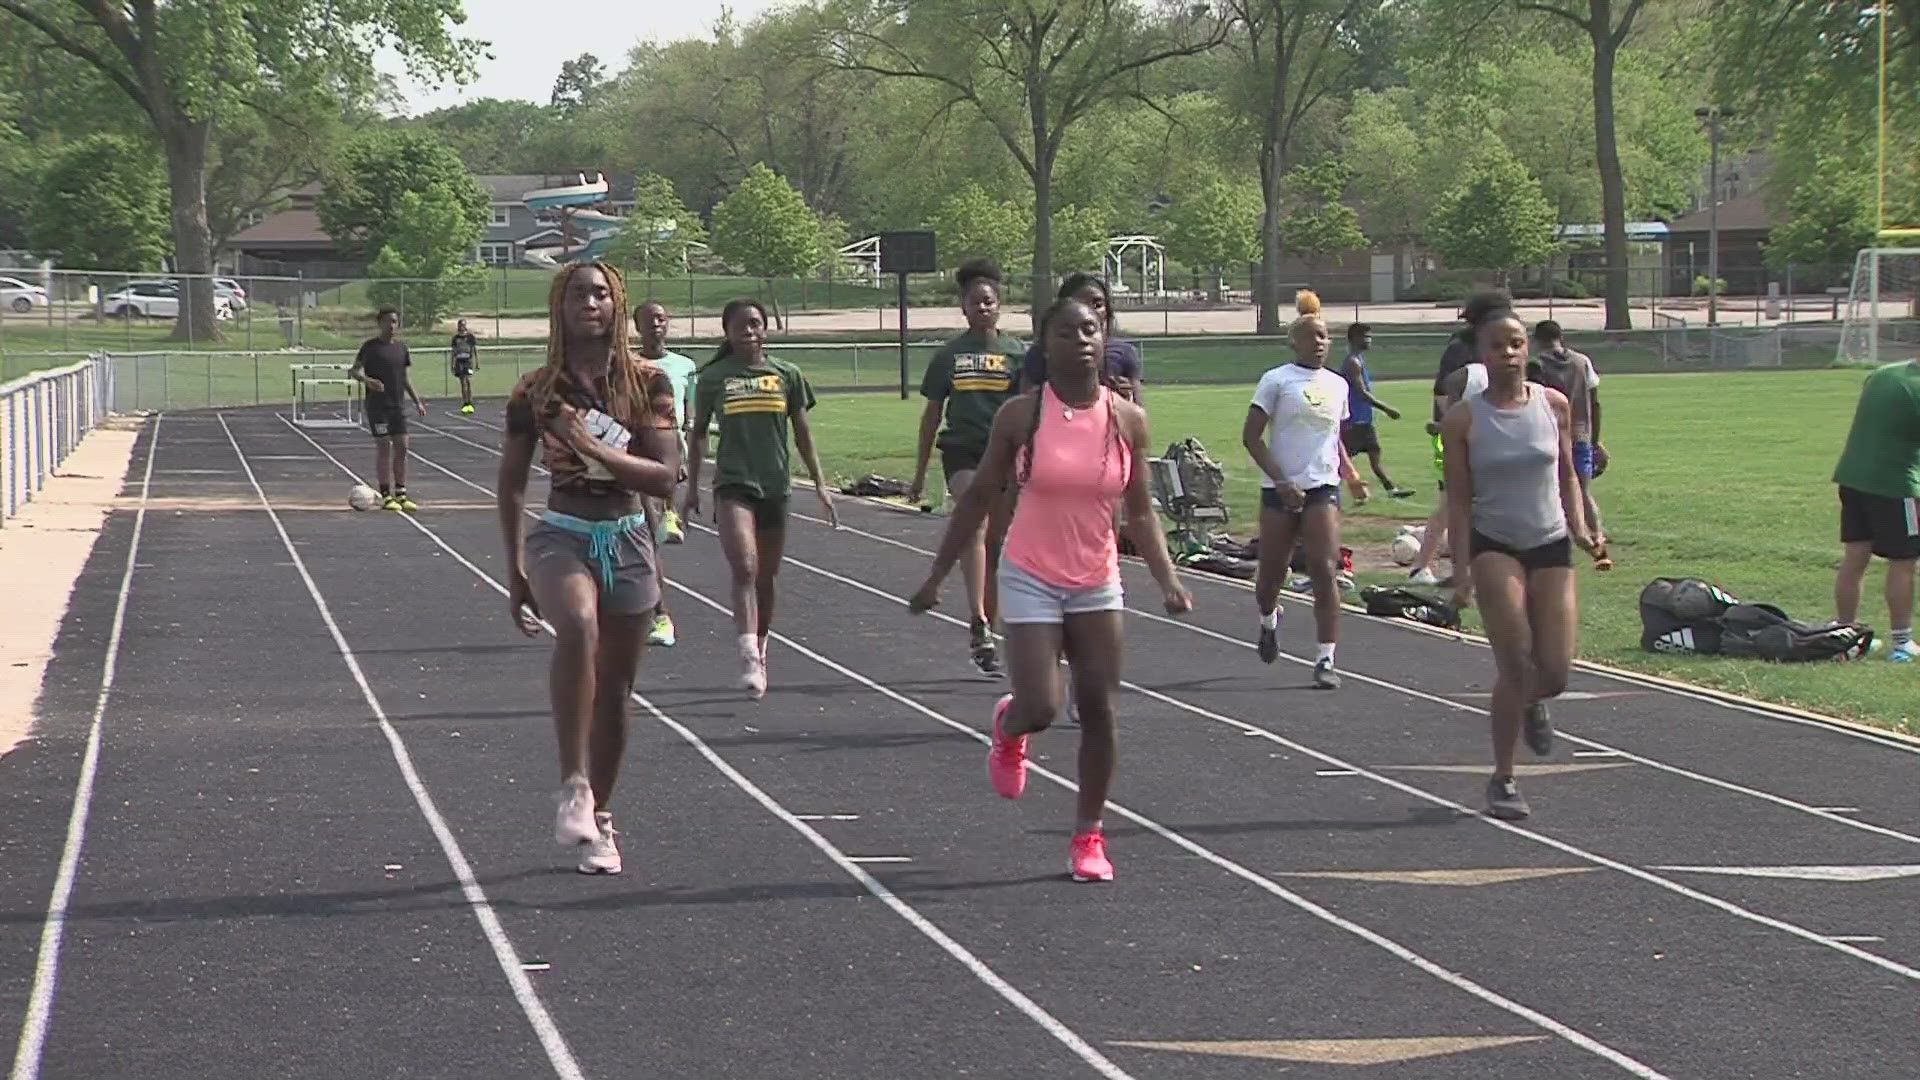 After a great performance at the Drake Relays, the Hoover girls track and field team is looking to make another statement - this time at state.